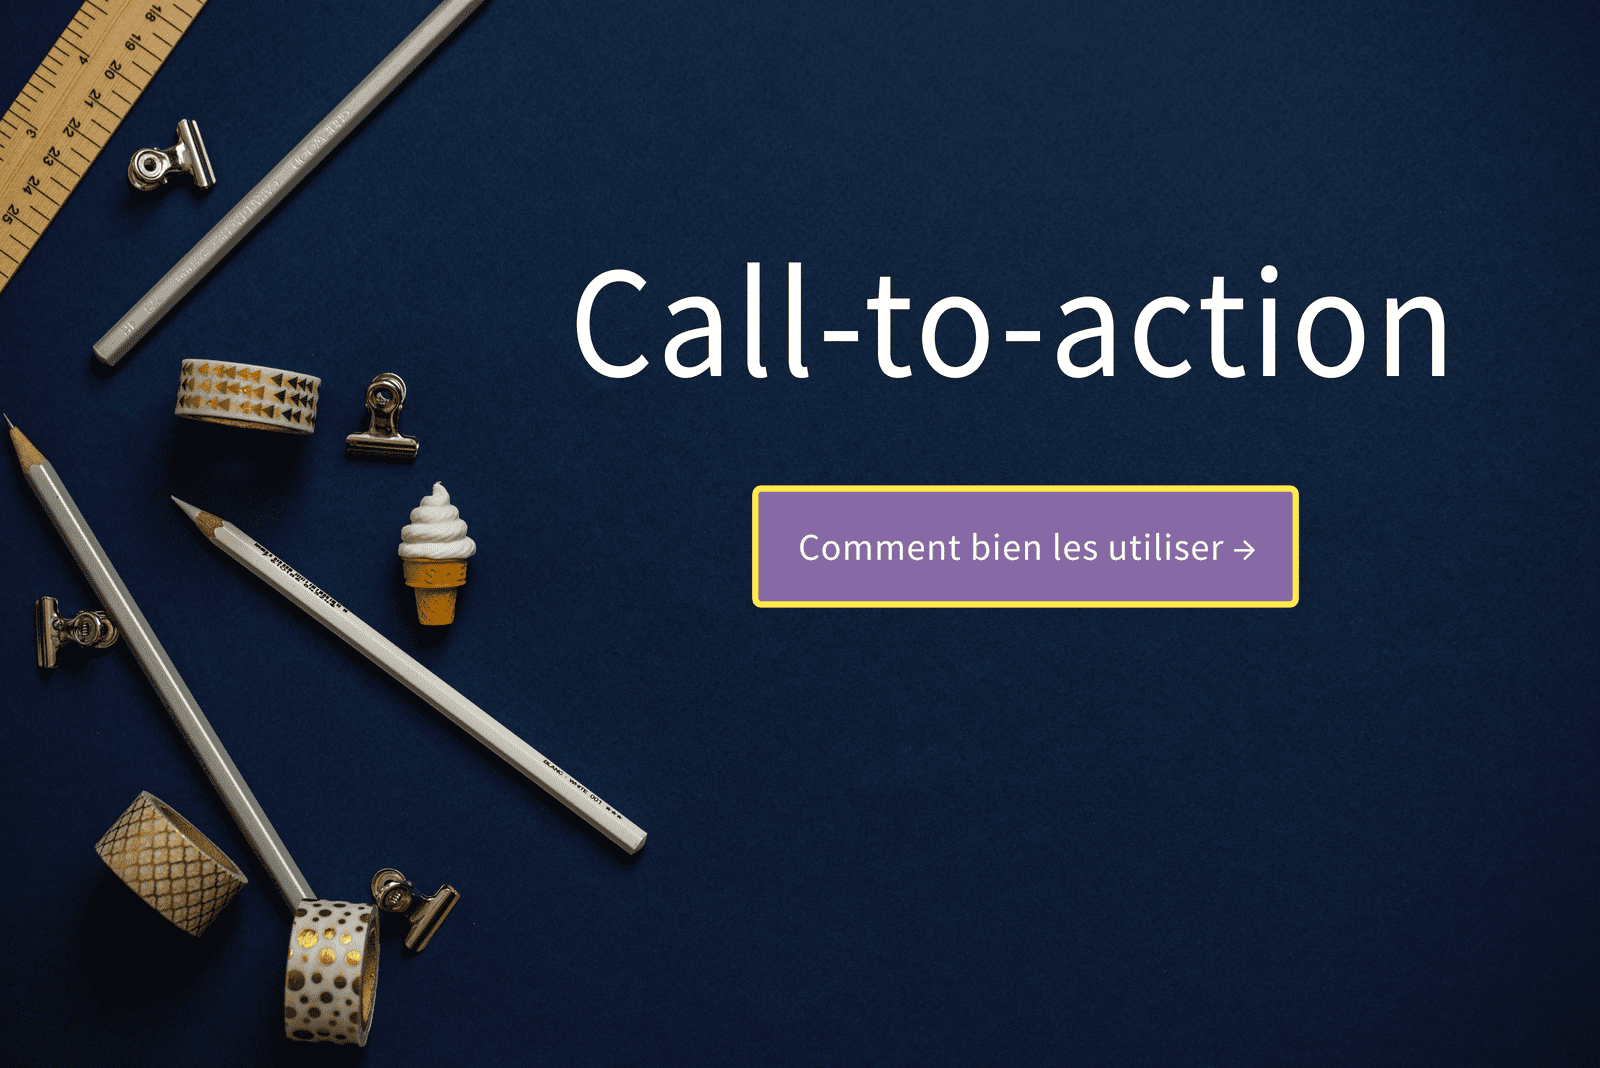 Call to action Primobiweb